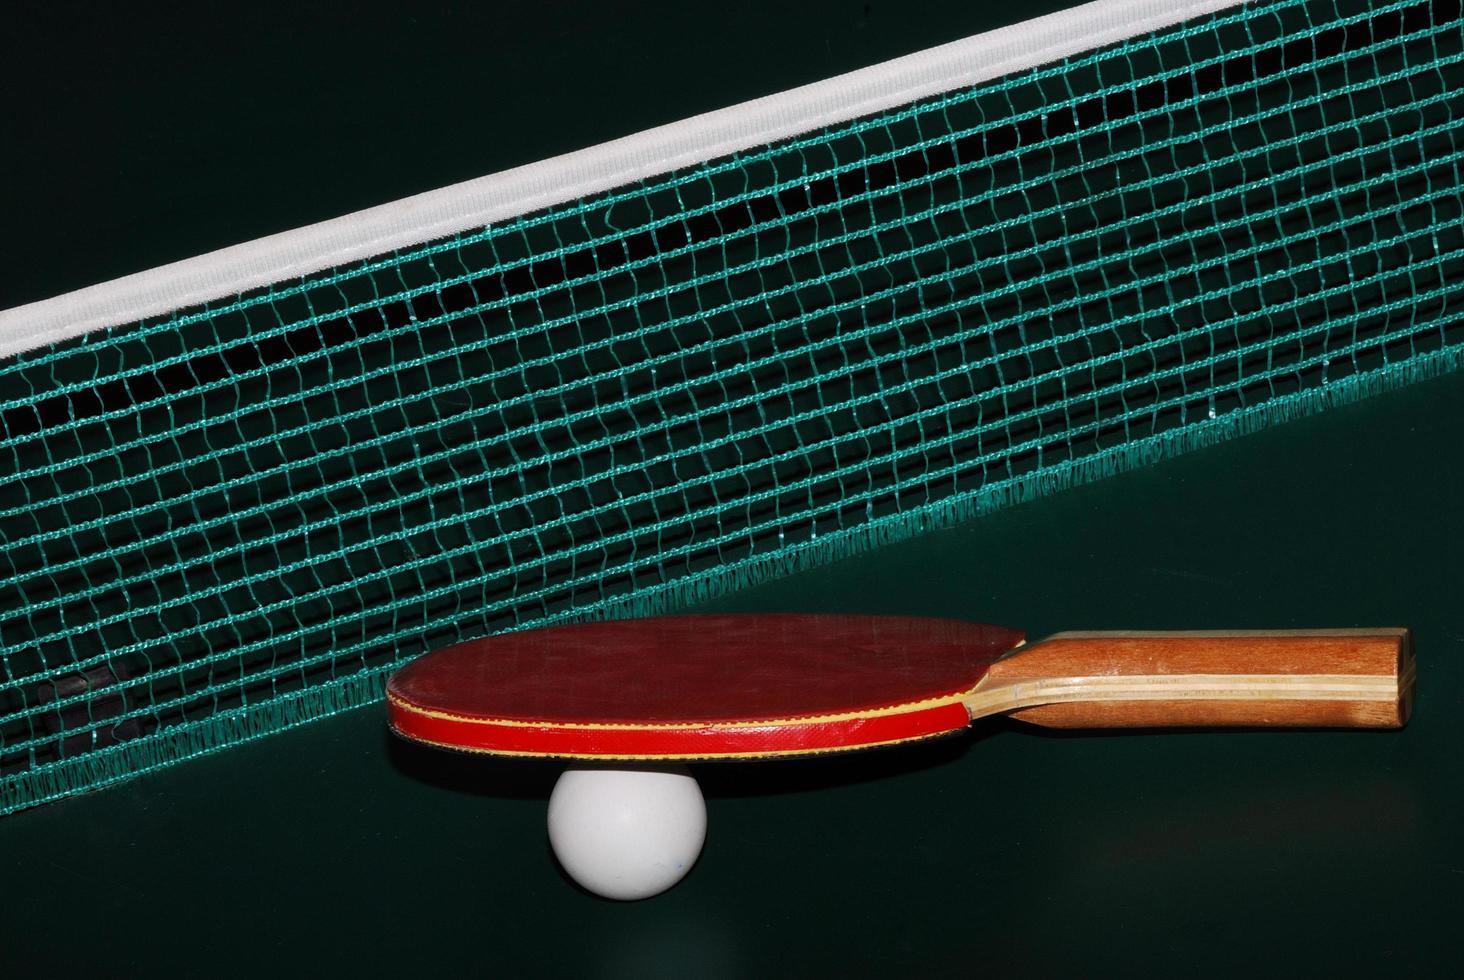 table tennis racket ball and net on table tennis table close photo